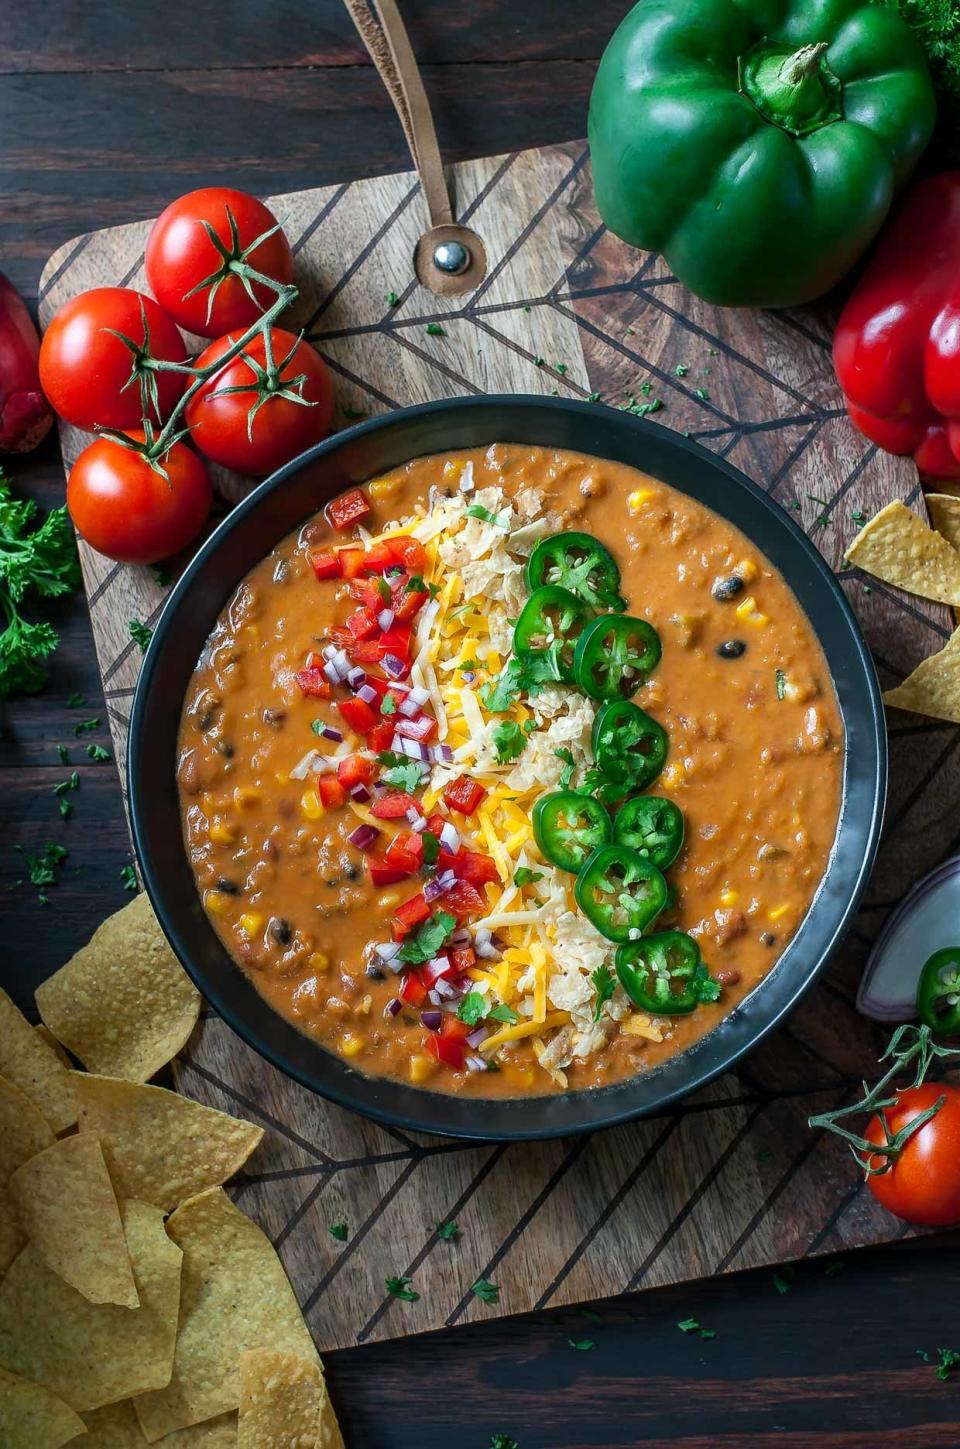 <strong>Get the <a href="https://peasandcrayons.com/2017/02/vegetarian-lentil-tortilla-soup.html" target="_blank">Vegetarian Lentil Tortilla Soup recipe</a>&nbsp;from Peas and Crayons</strong>